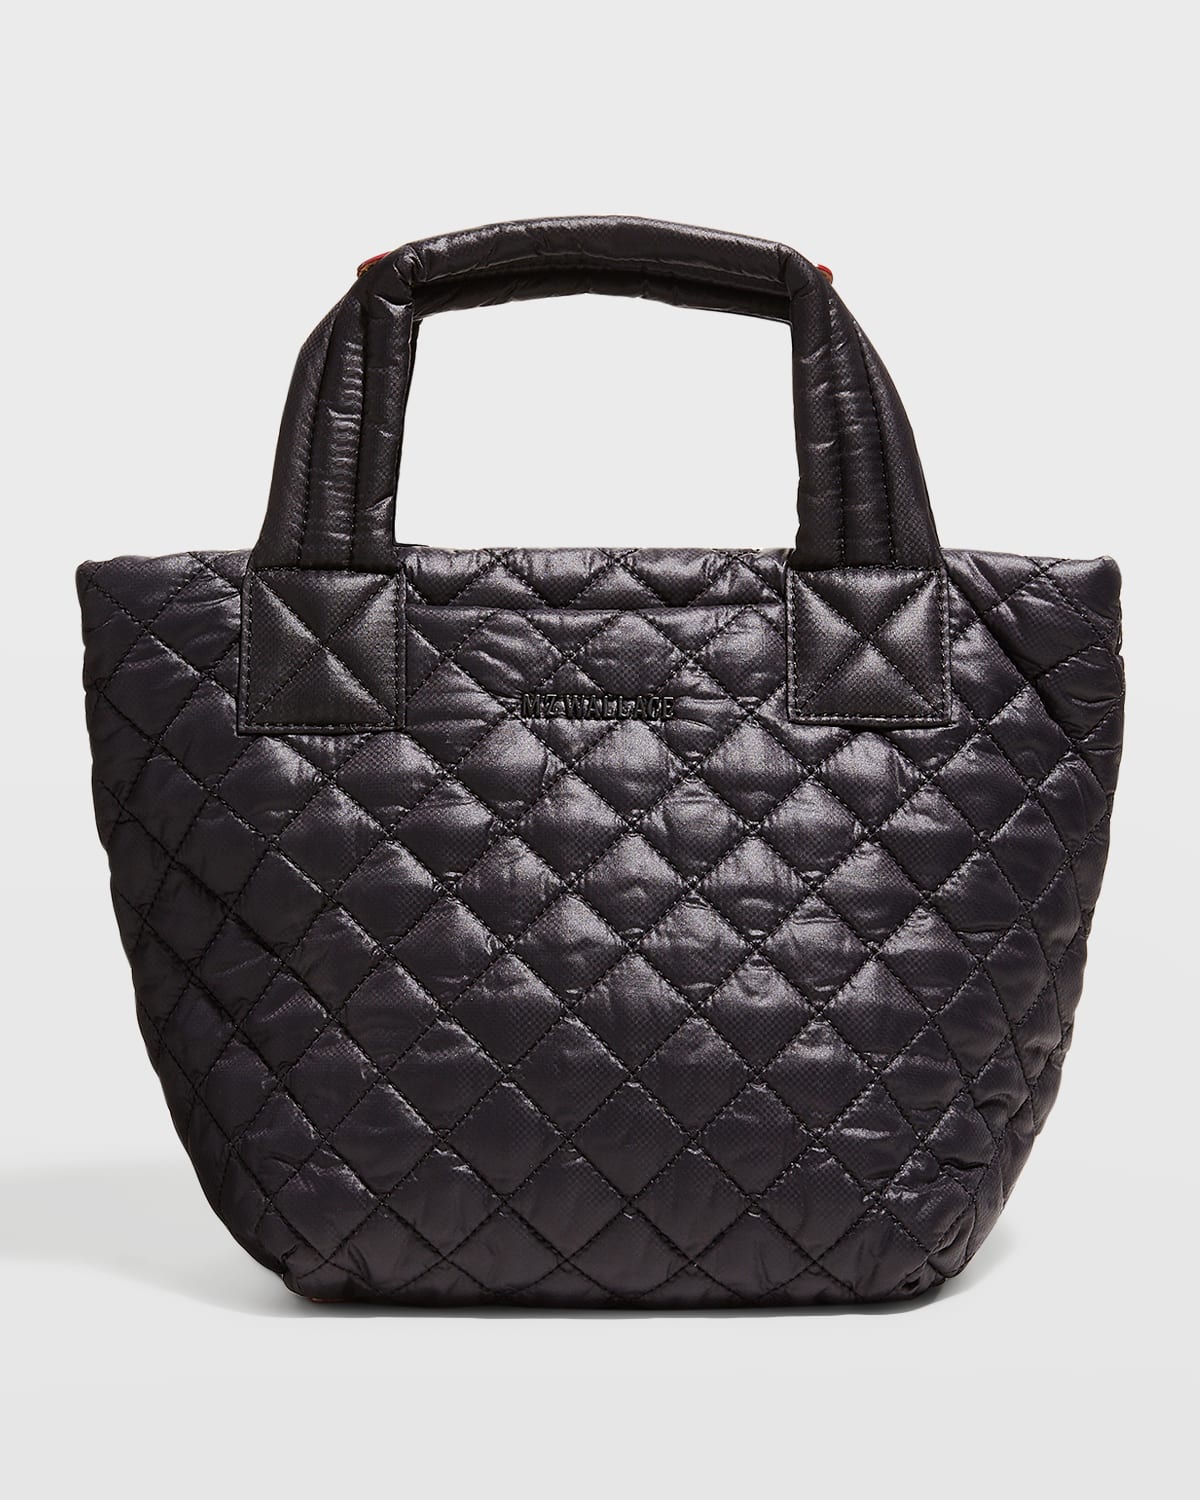 MZ WALLACE METRO DELUXE MINI QUILTED NYLON TOTE BAG